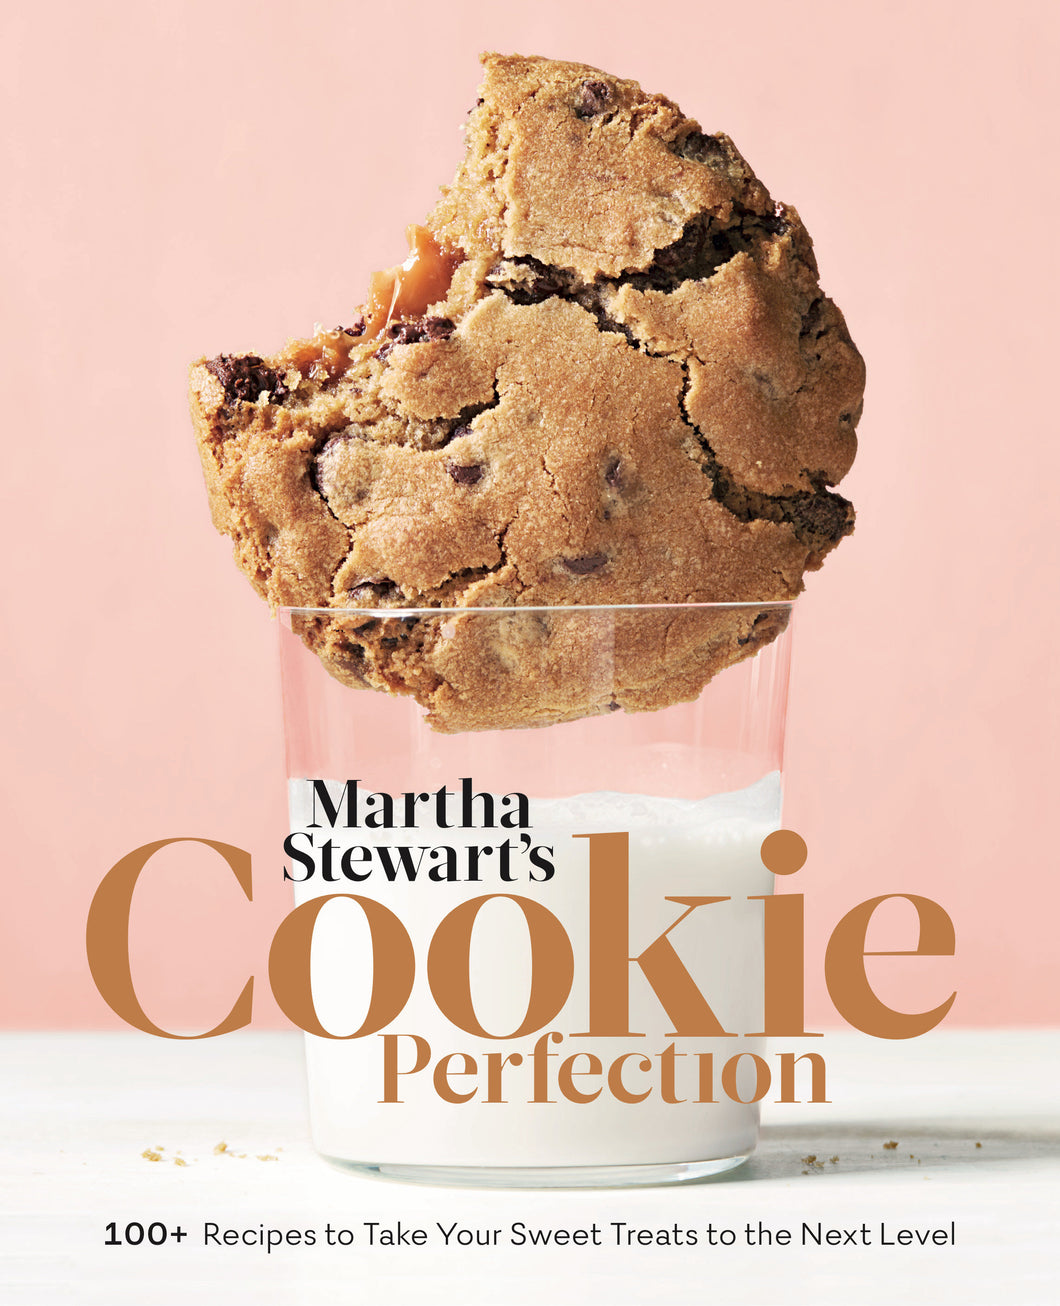 Martha Stewart's Cookie Perfection : 100+ Recipes to Take Your Sweet Treats to the Next Level: A Baking Book